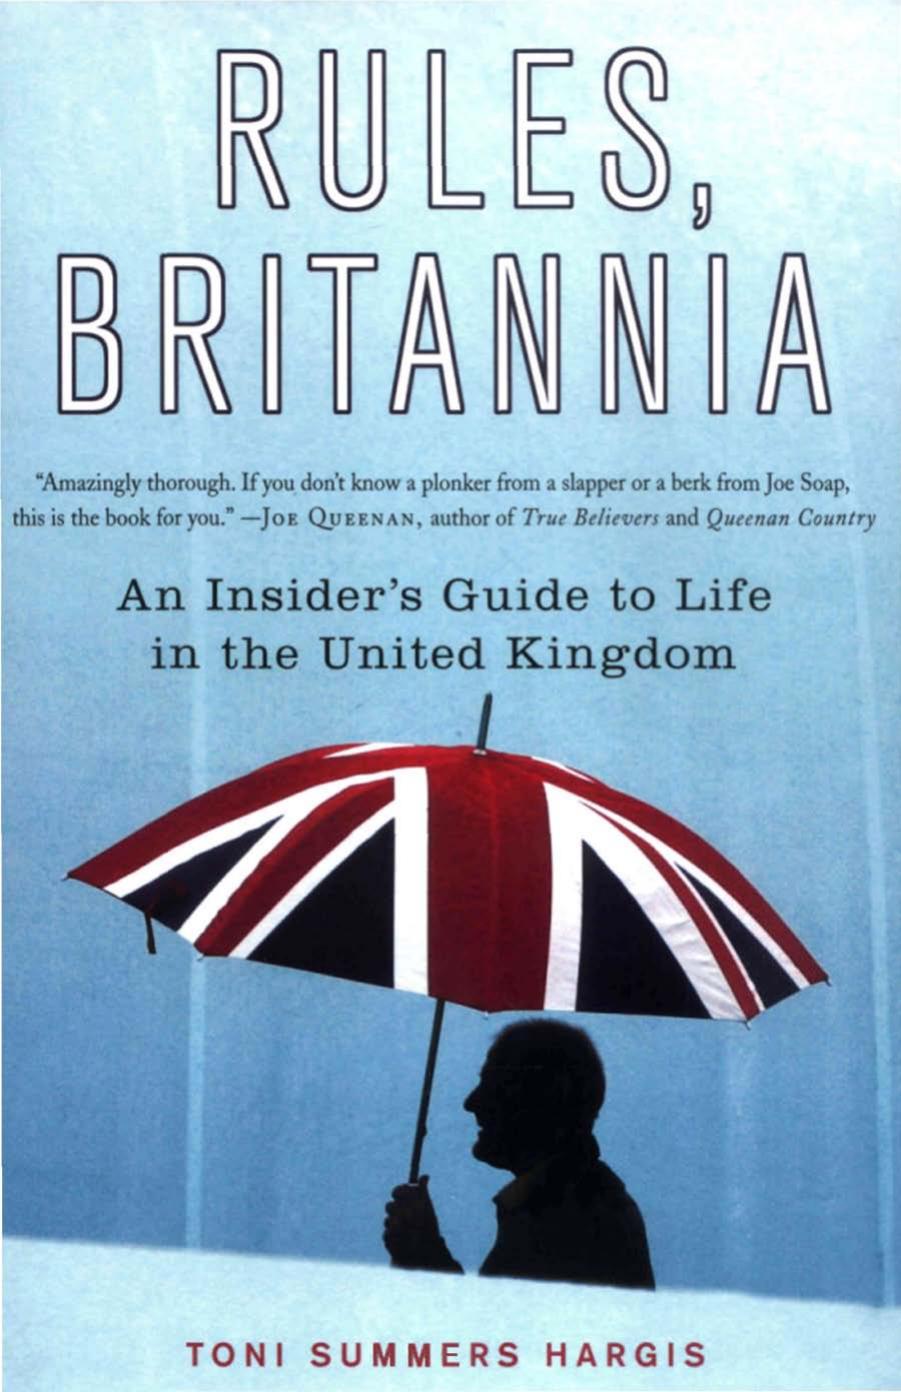 Rules, Britannia: An Insider's Guide to Life in the United Kingdom by Toni Summers Hargis